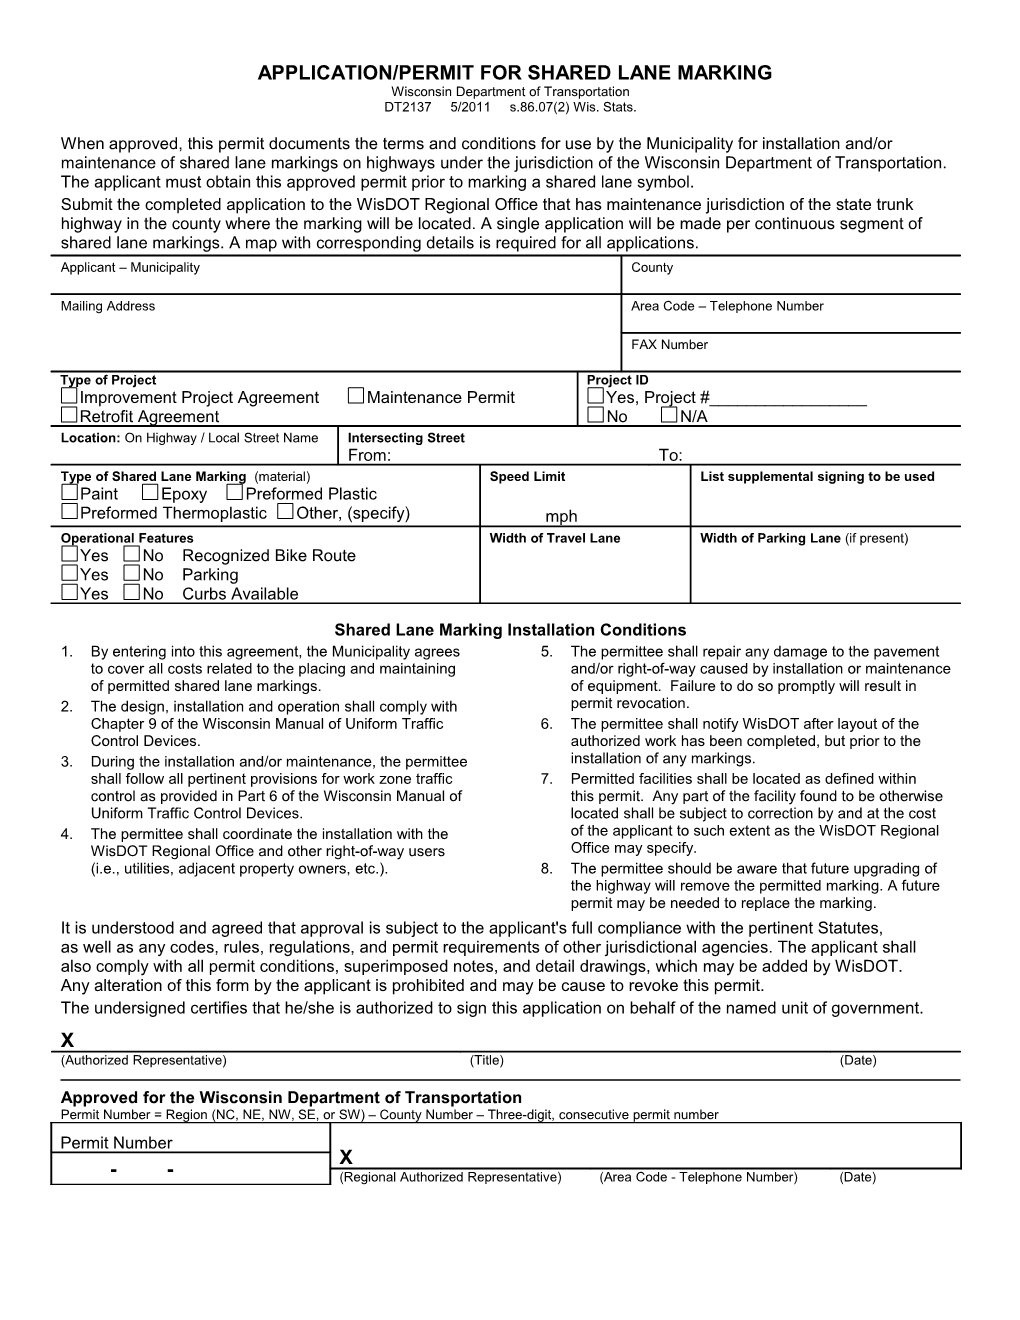 DT2137 Application/Permit for Shared Lane Marking